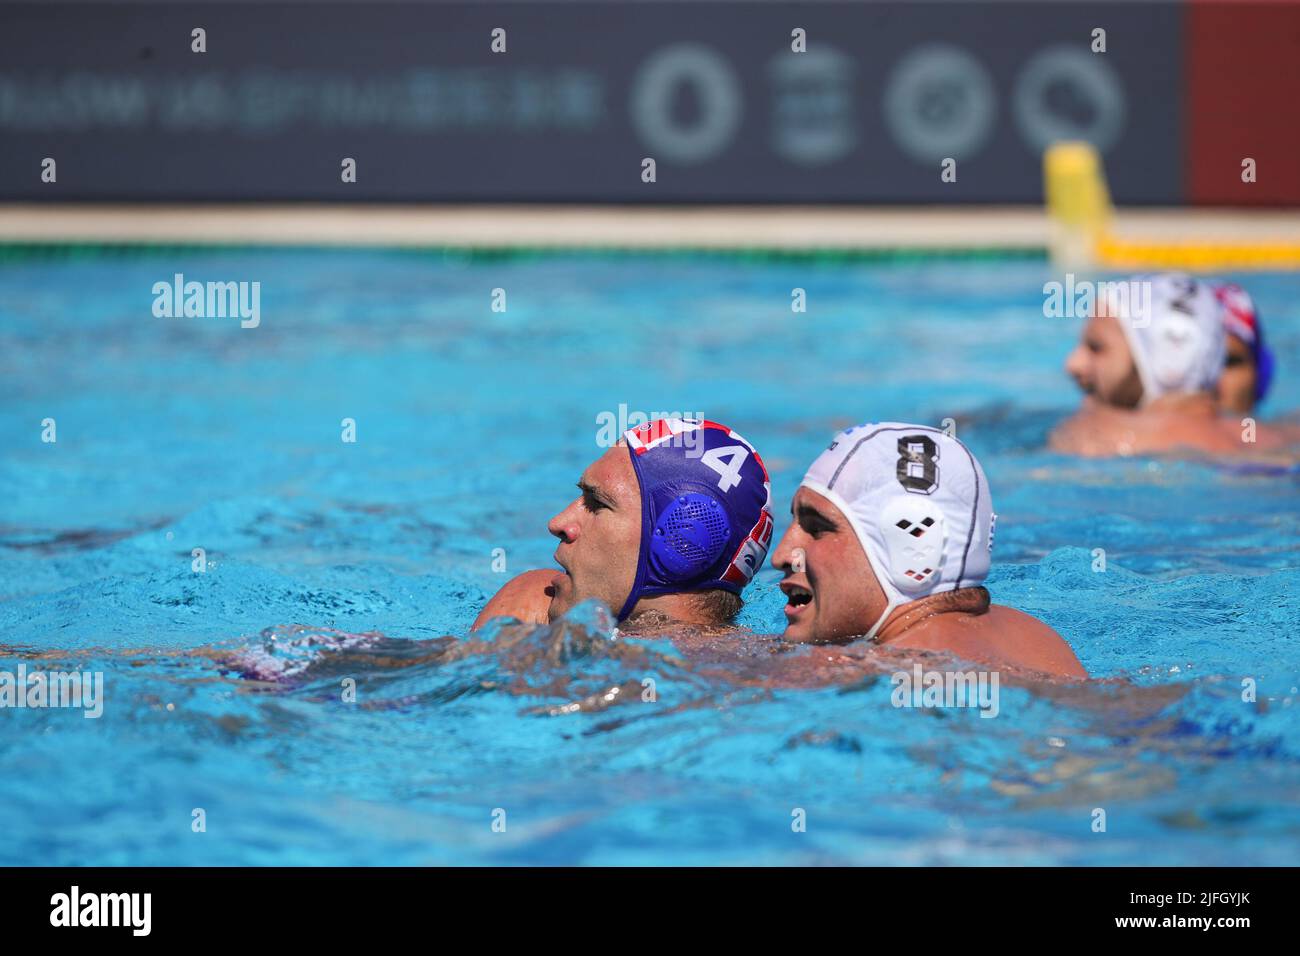 BUDAPEST, HUNGARY - JULY 3: Ivan Krapic of Croatia and Stylianos Argyropoulos Kanakakis of Greece during the FINA World Championships Budapest 2022 Bronze medal match between Greece and Croatia on July 3, 2022 in Budapest, Hungary (Photo by Albert ten Hove/Orange Pictures) Stock Photo